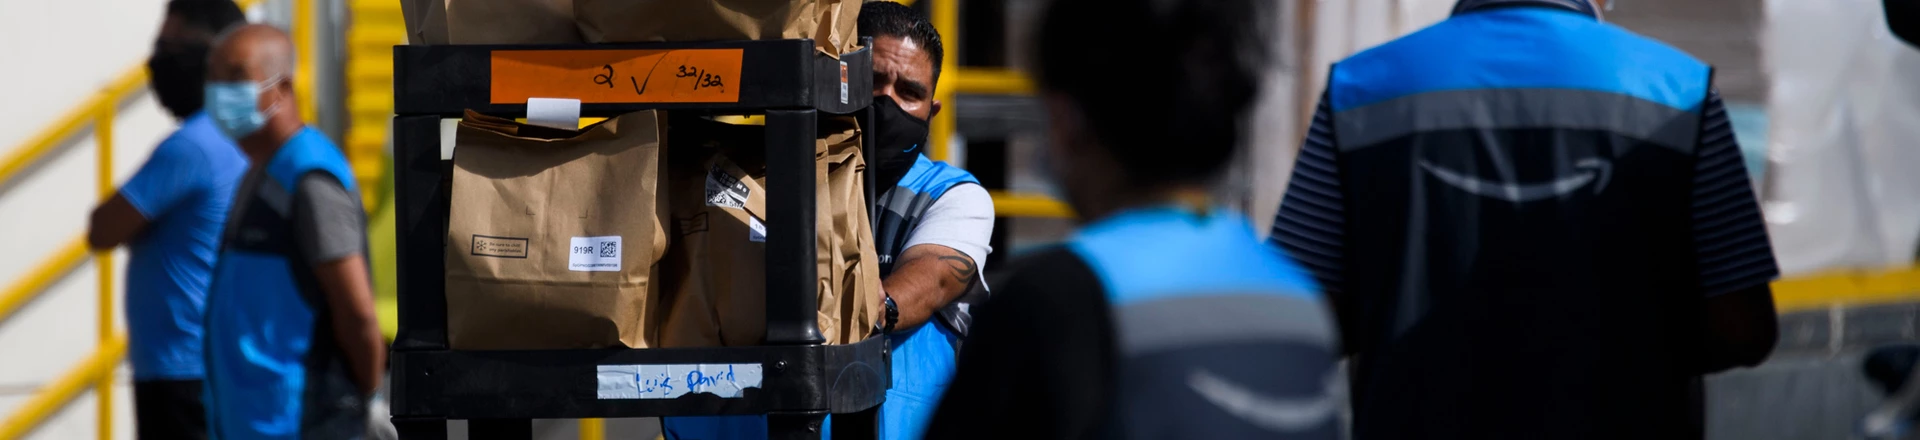 An Amazon.com Inc. delivery driver pushes a cart of groceries to load into a vehicle outside of a distribution facility on February 2, 2021 in Redondo Beach, California. - Jeff Bezos said February 1, 2021, he would give up his role as chief executive of Amazon later this year as the tech and e-commerce giant reported a surge in profit and revenue in the holiday quarter. The announcement came as Amazon reported a blowout holiday quarter with profits more than doubling to $7.2 billion and revenue jumping 44 percent to $125.6 billion. (Photo by Patrick T. FALLON / AFP) (Photo by PATRICK T. FALLON/AFP via Getty Images)